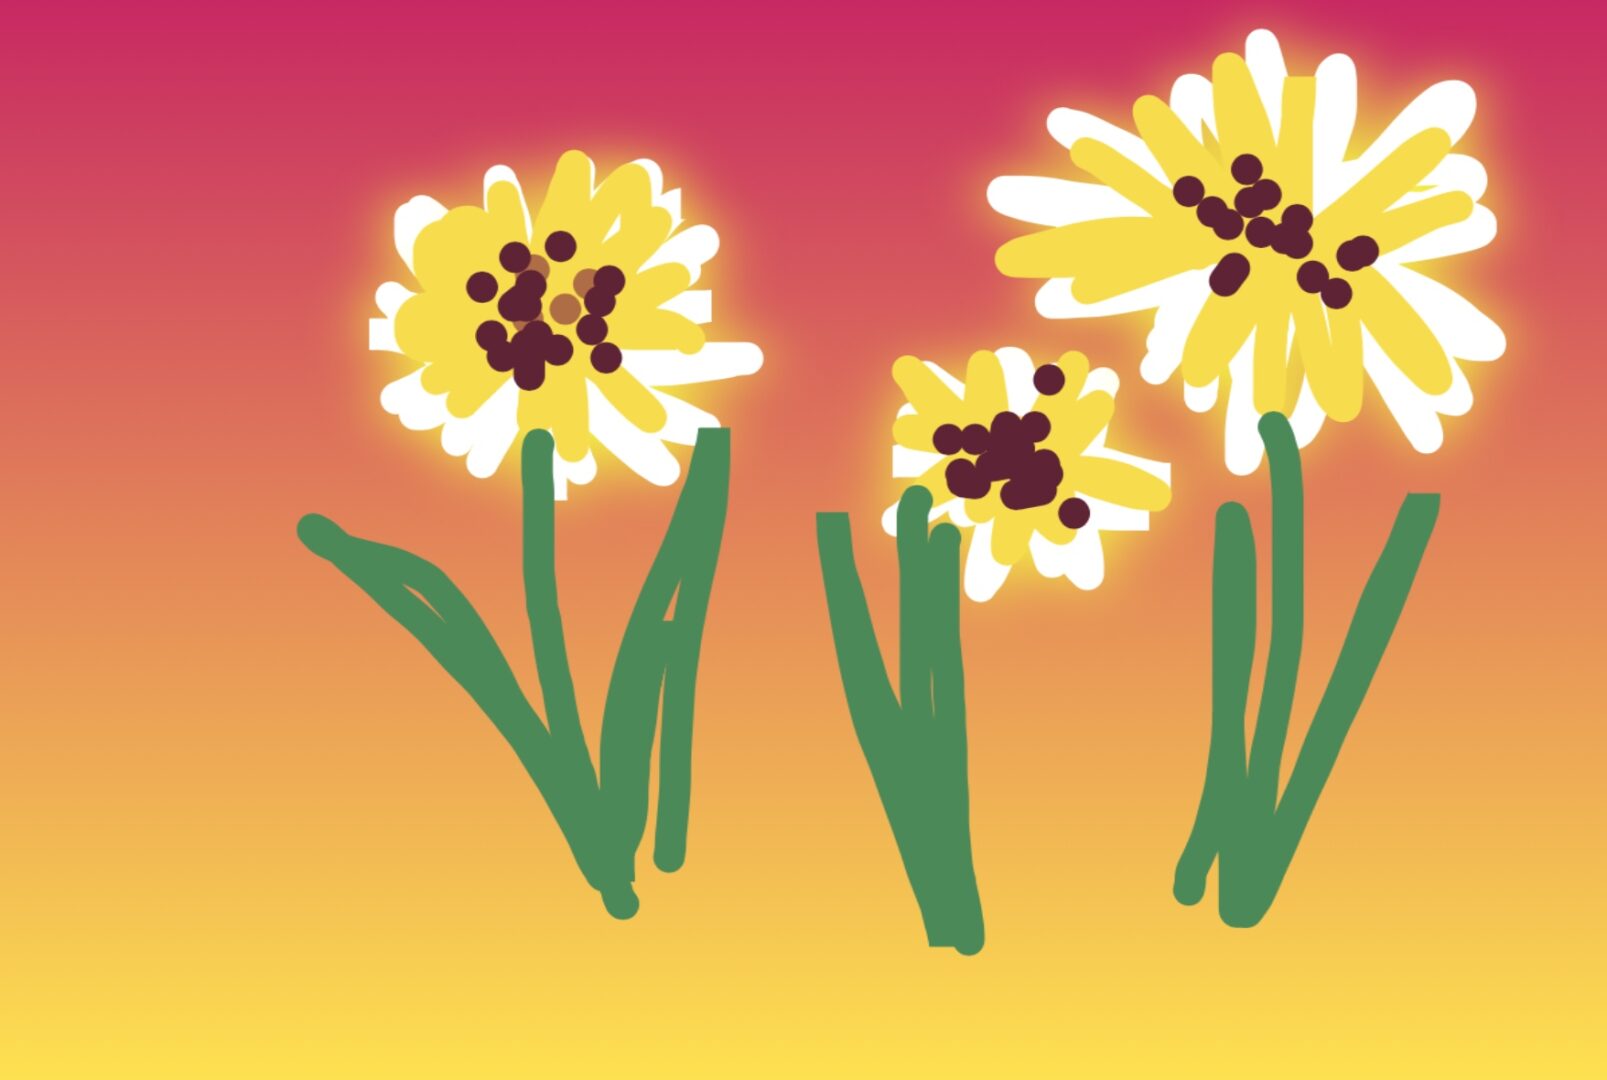 A drawing of three yellow flowers on a pink background.